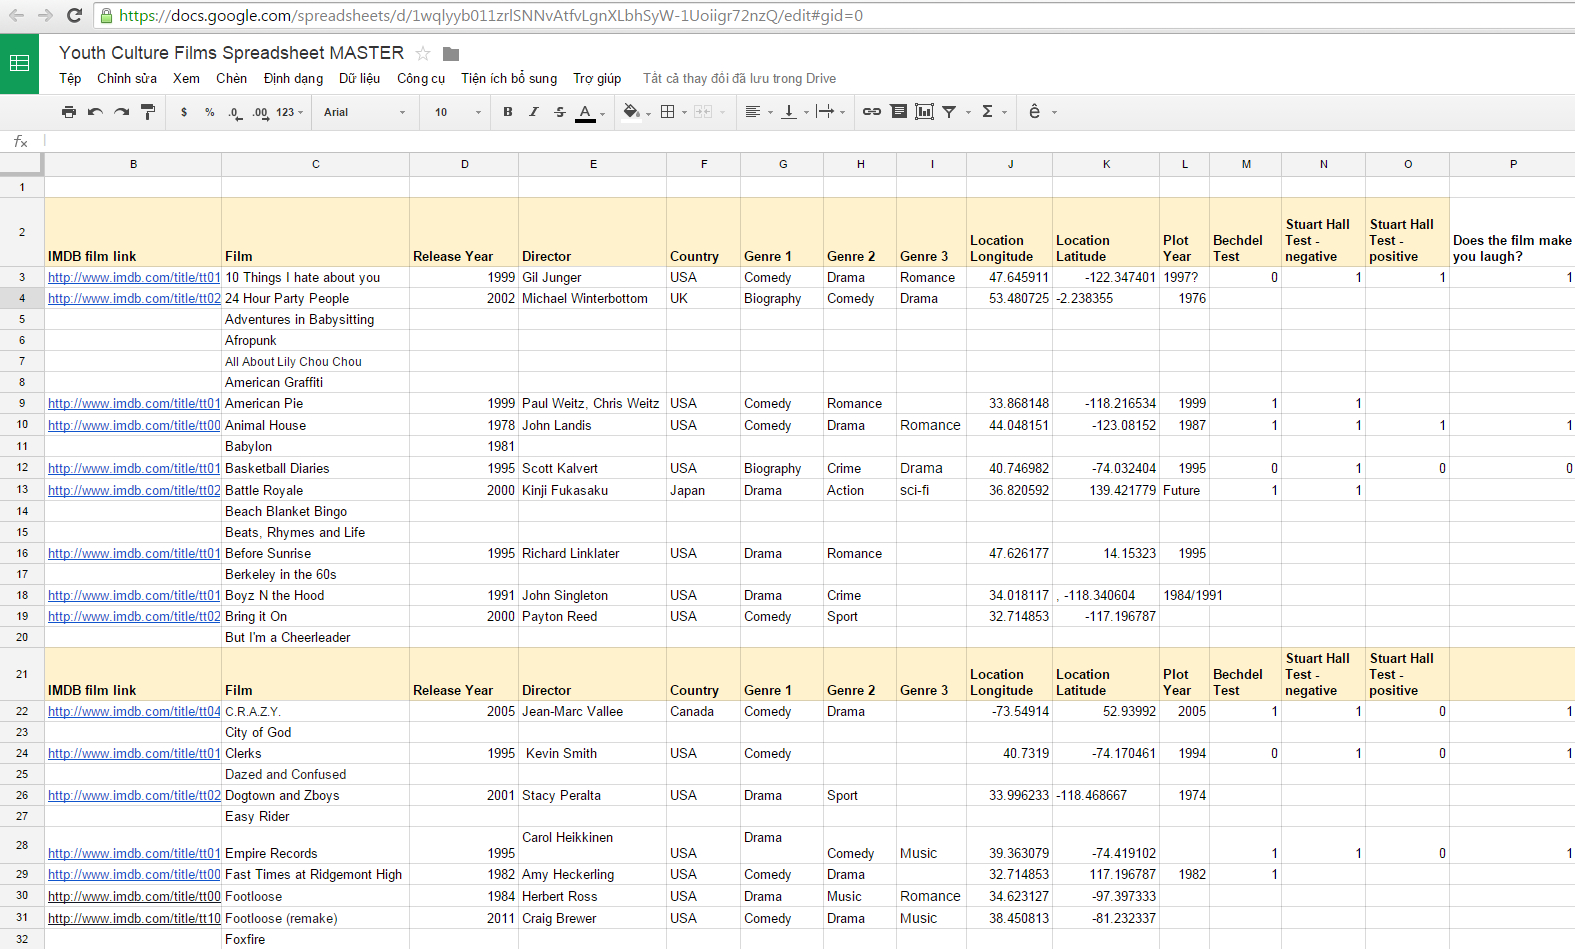 Hall Plot Spreadsheet In Film – Youth Culture And Media